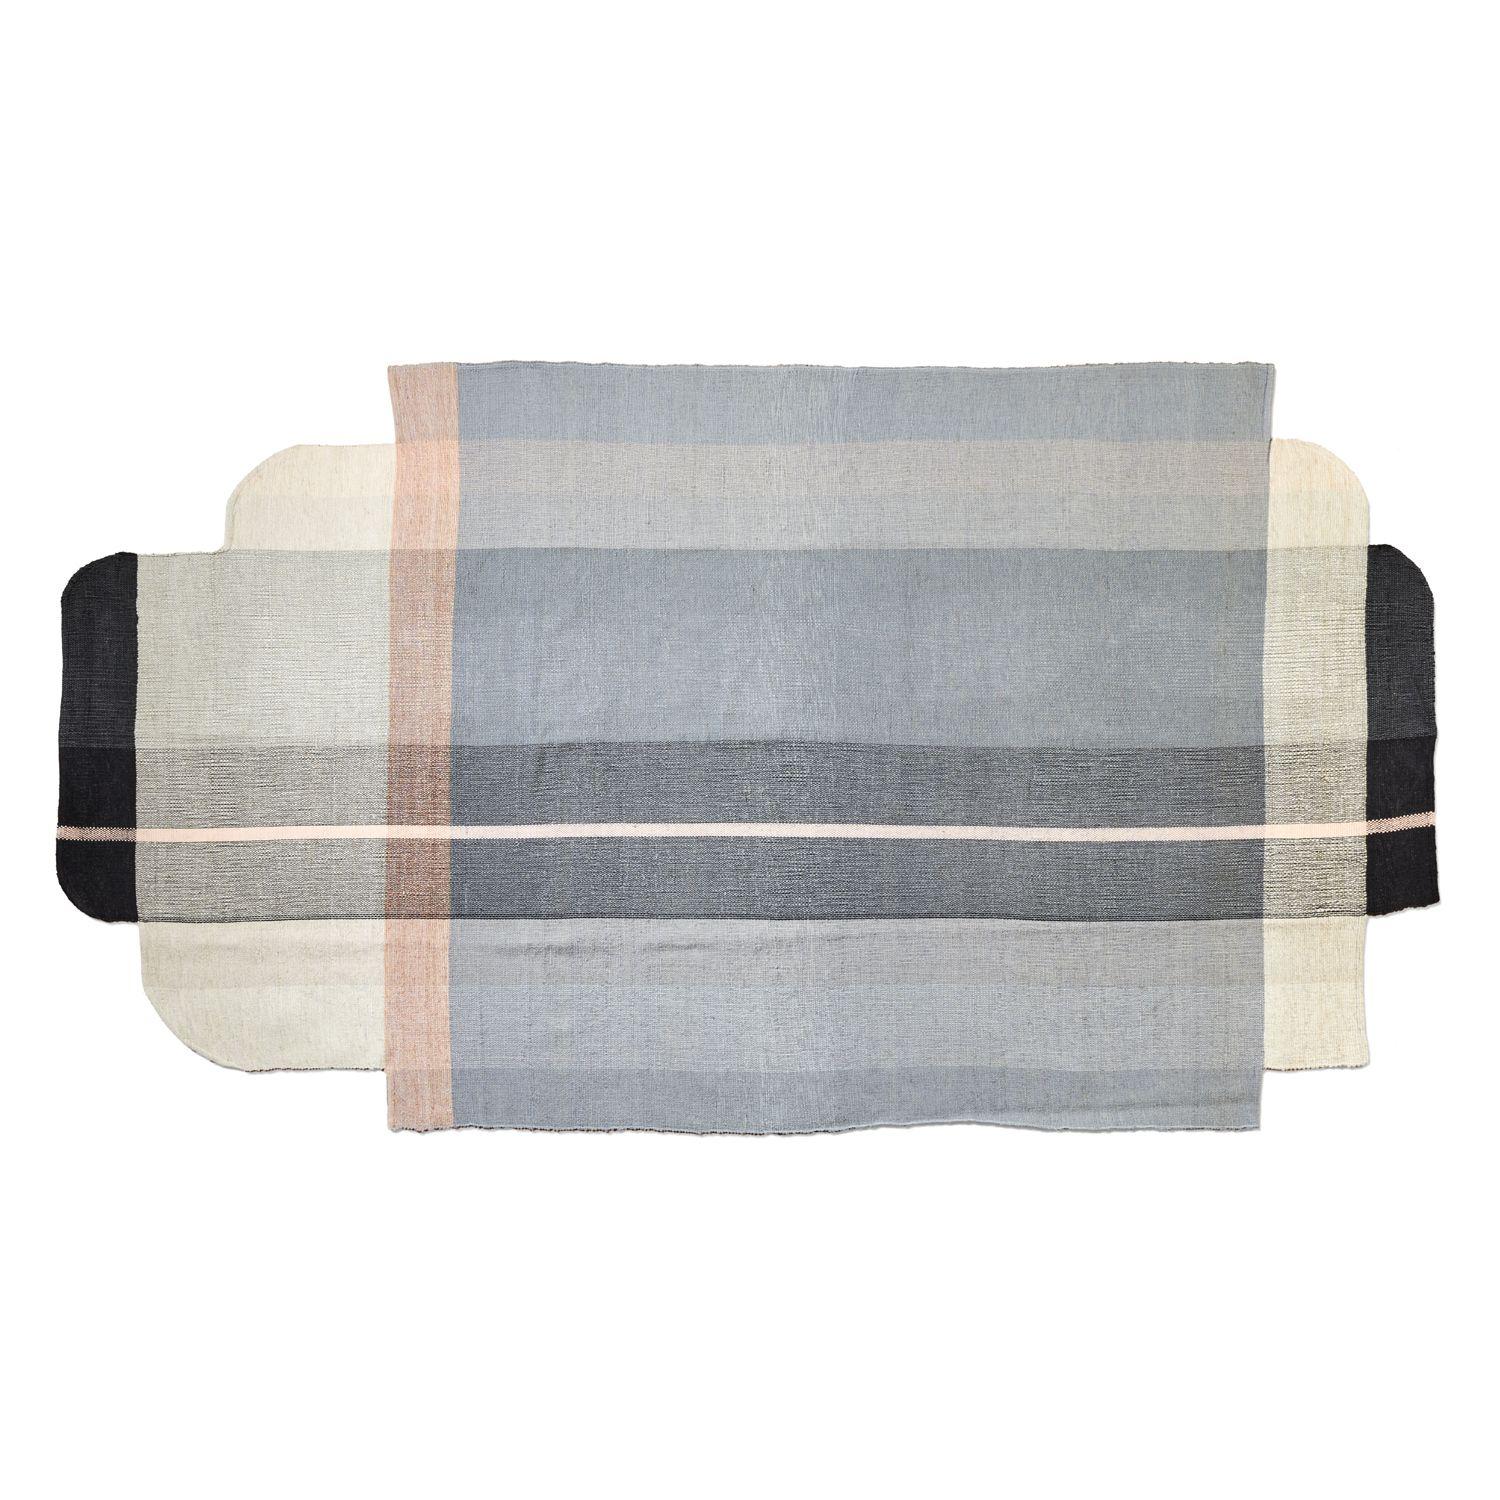 Large muyska rug by Mae Engelgeer
Materials: 100% natural virgin wool
Technique: Hand-woven in Colombia.
Dimensions: W 190 x L 365 cm 
Available in colors: Grey / beige / black, grey / purple / light blue, light blue / grey / dark blue.